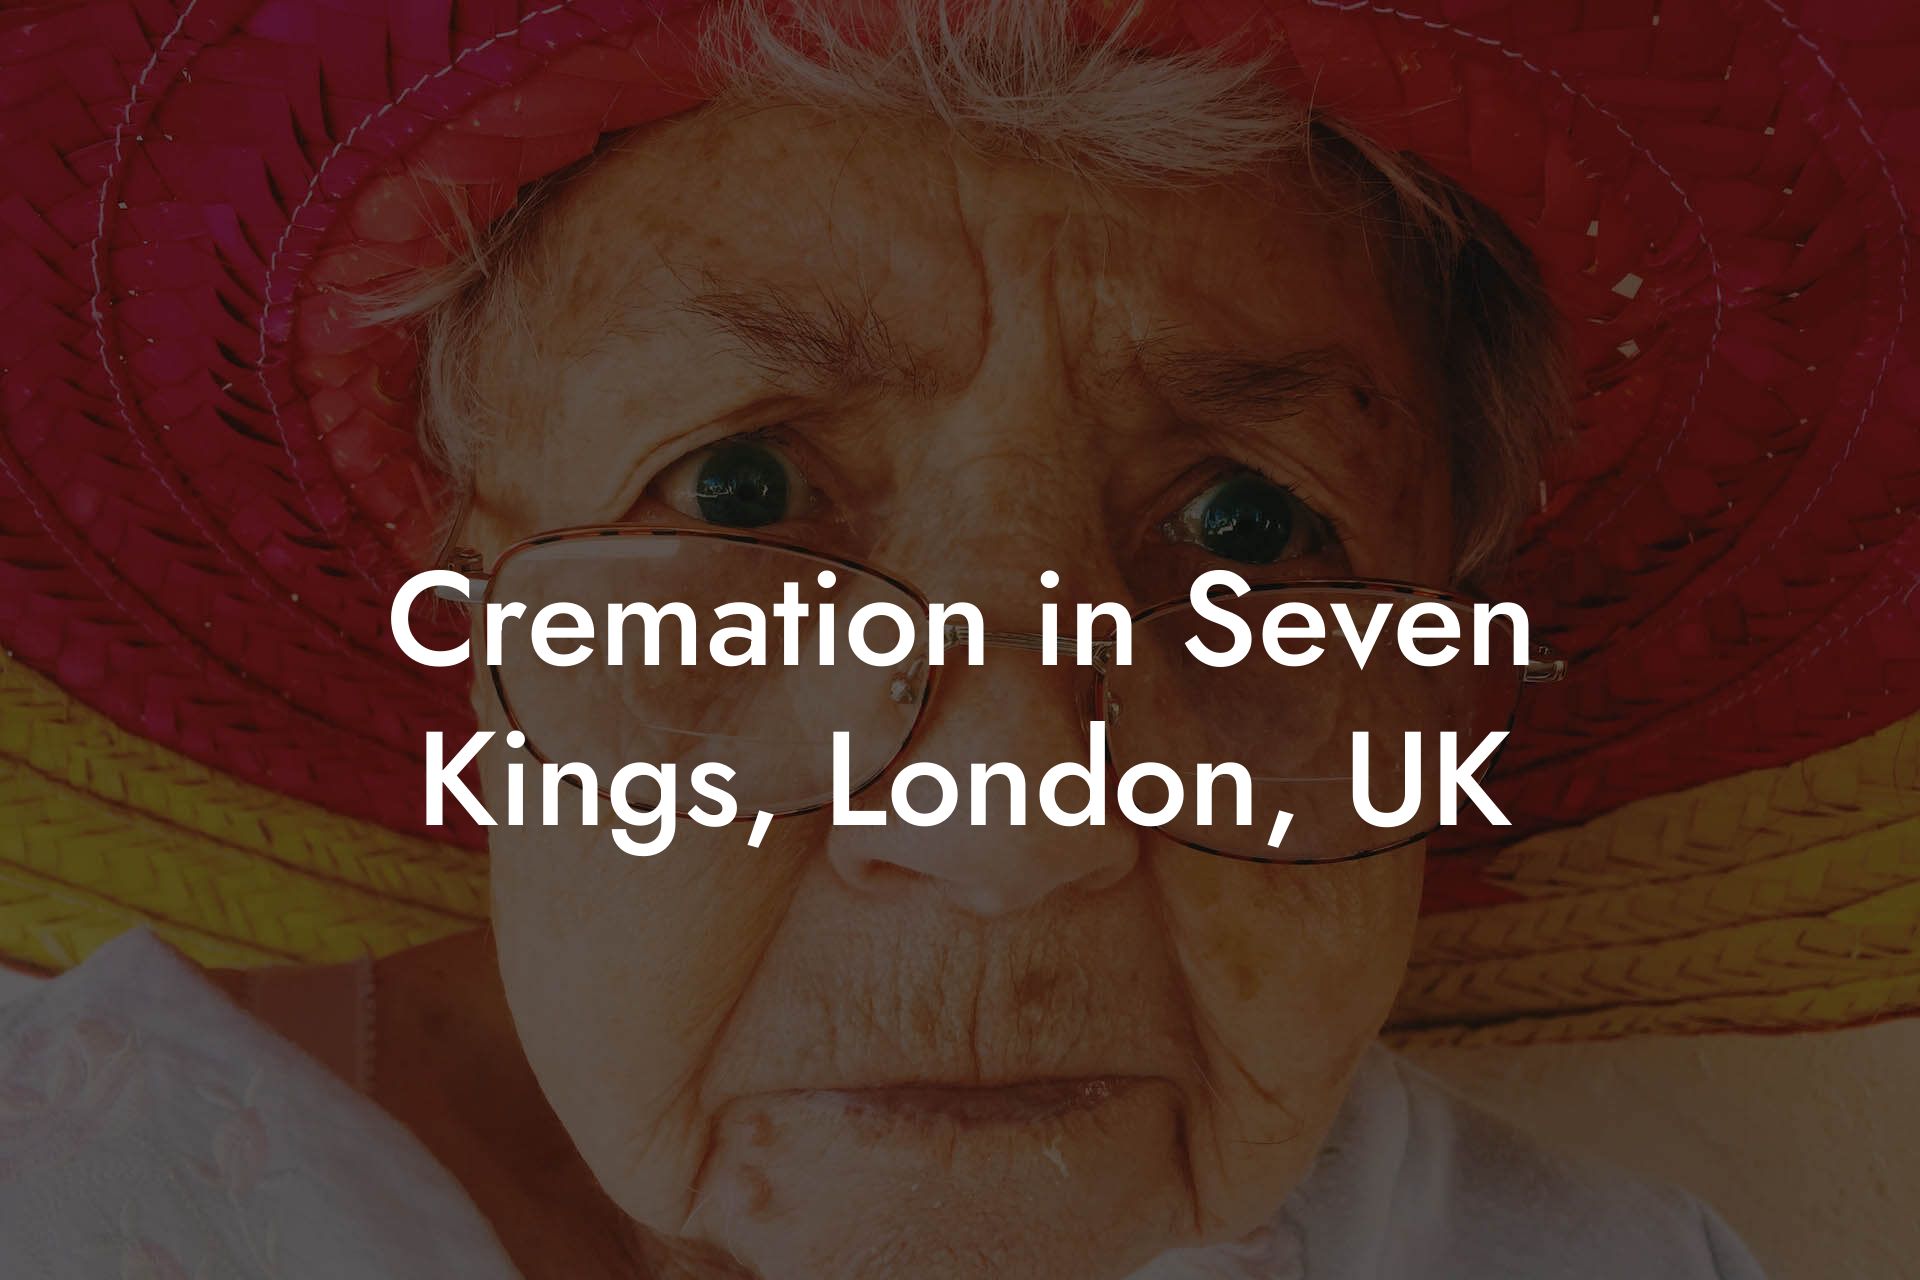 Cremation in Seven Kings, London, UK